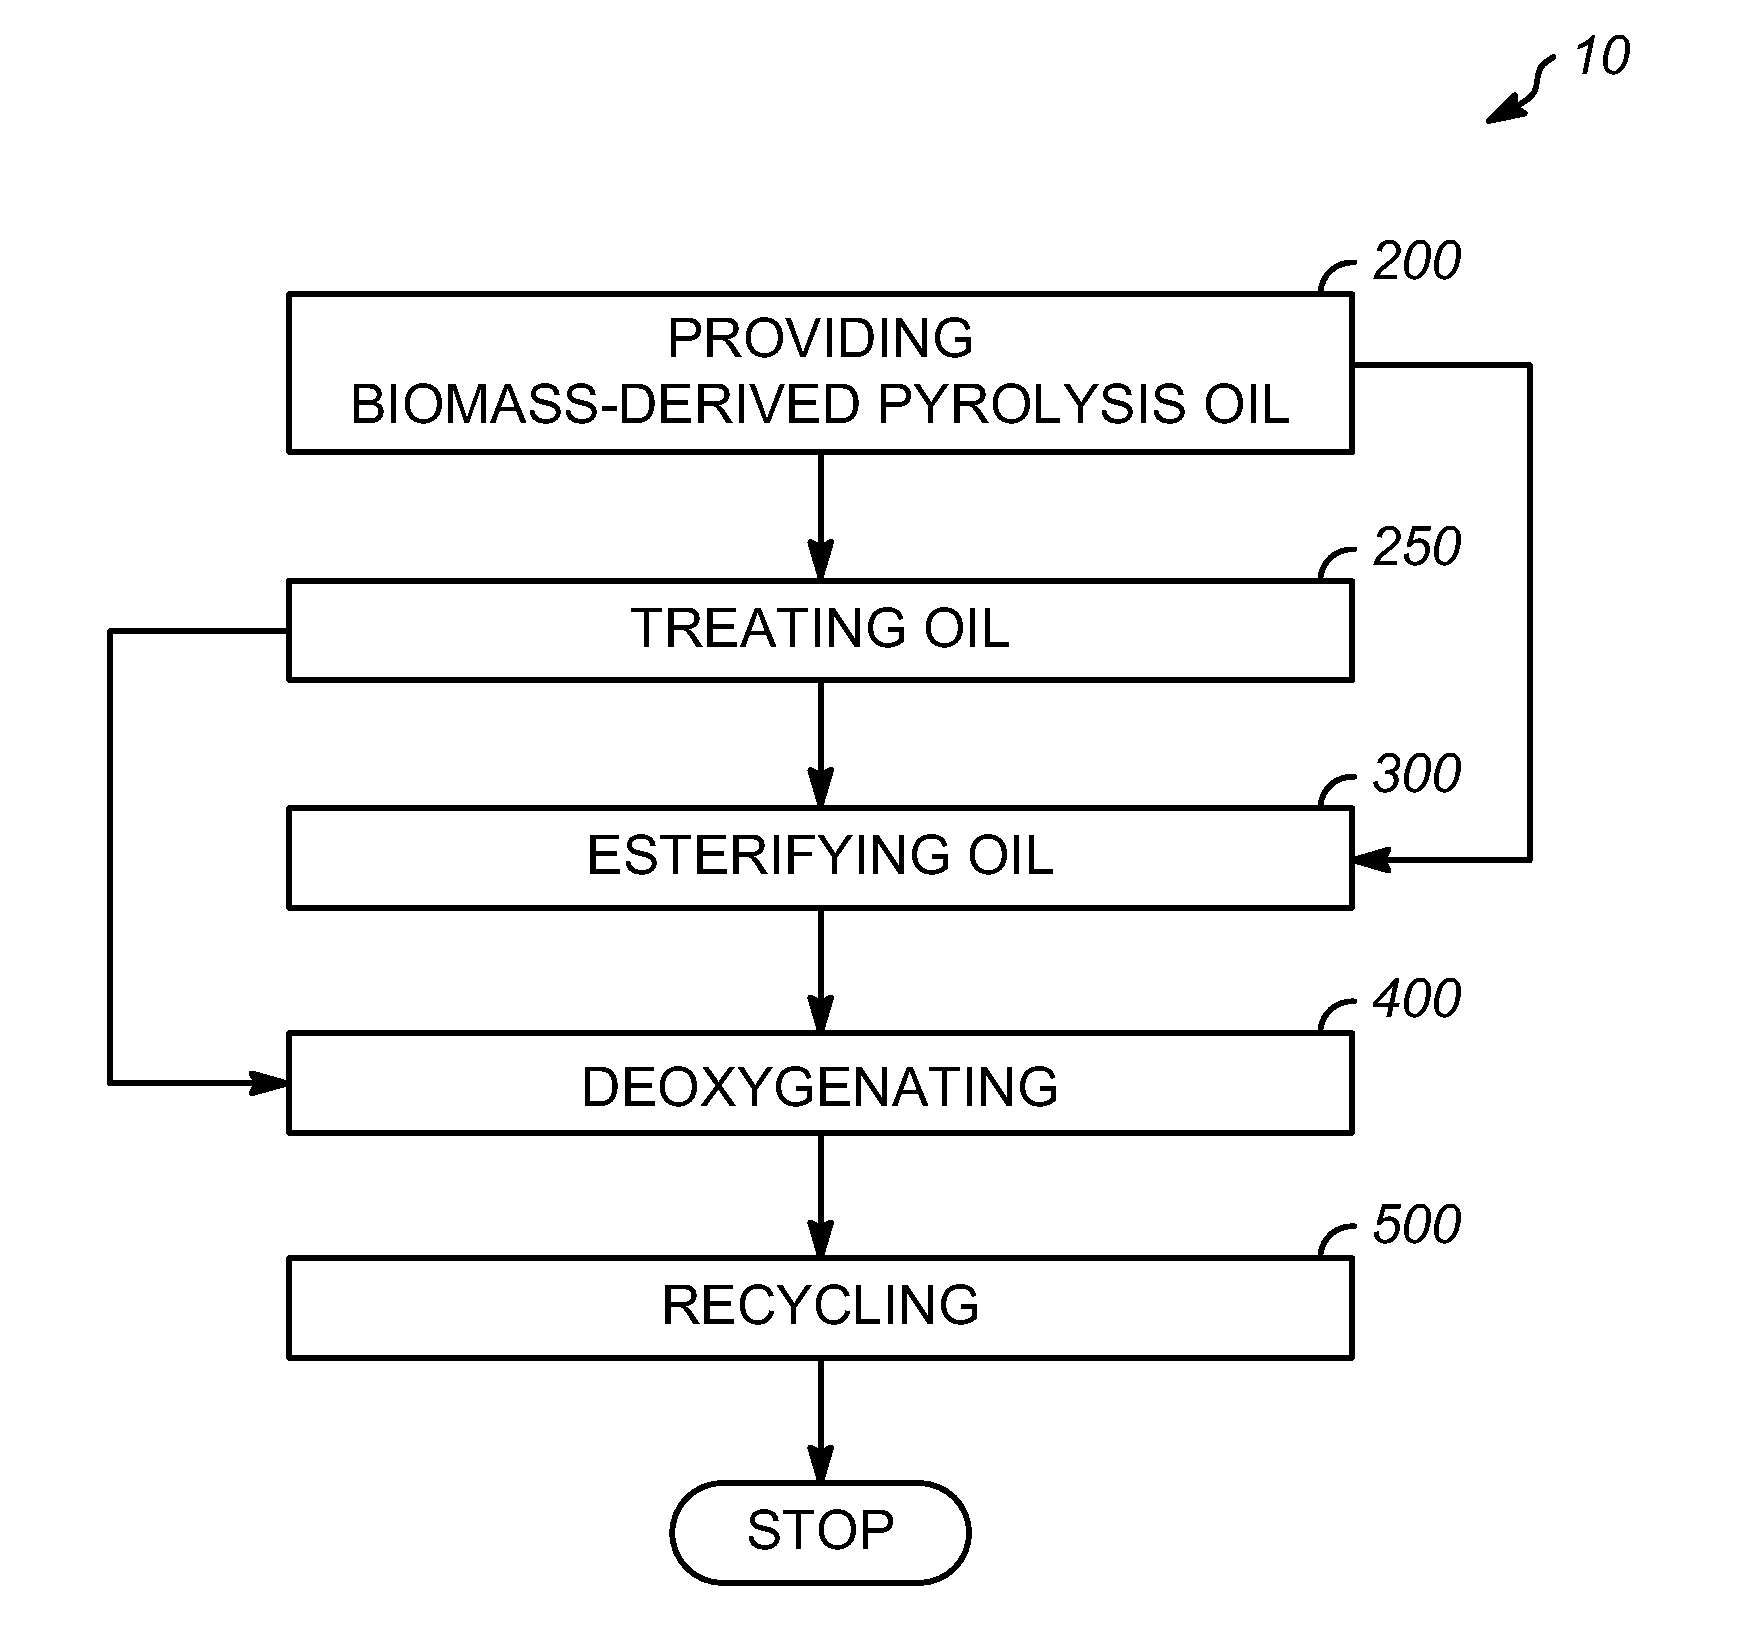 Methods for producing low oxygen biomass-derived pyrolysis oils